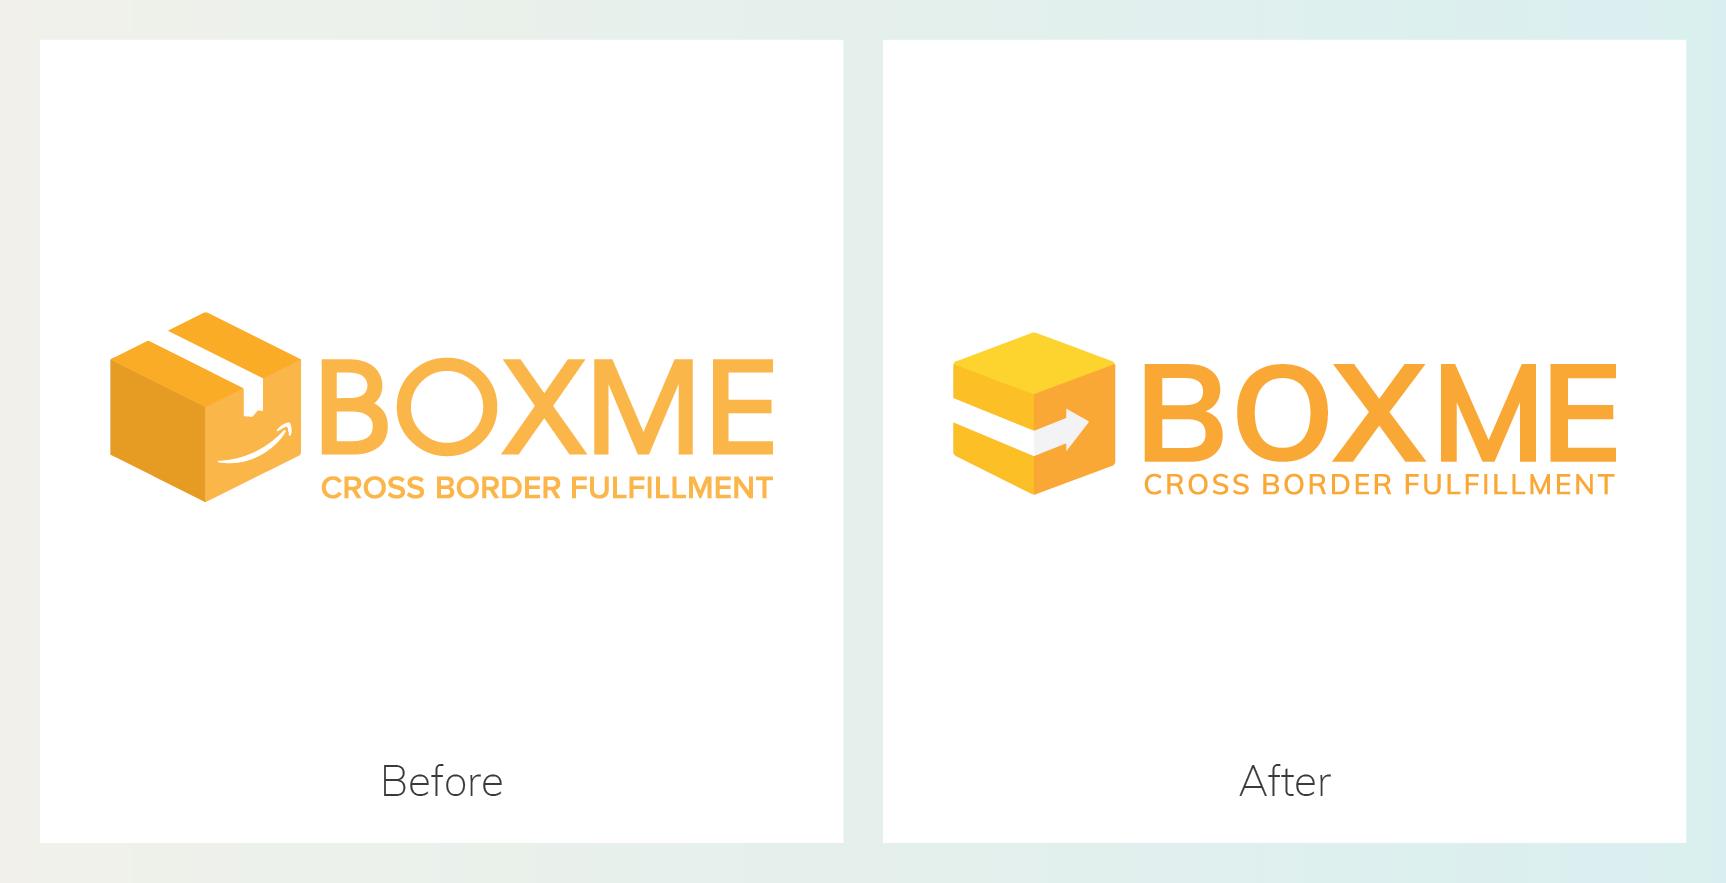 Boxme - New Brand Identity System Announcement! 2